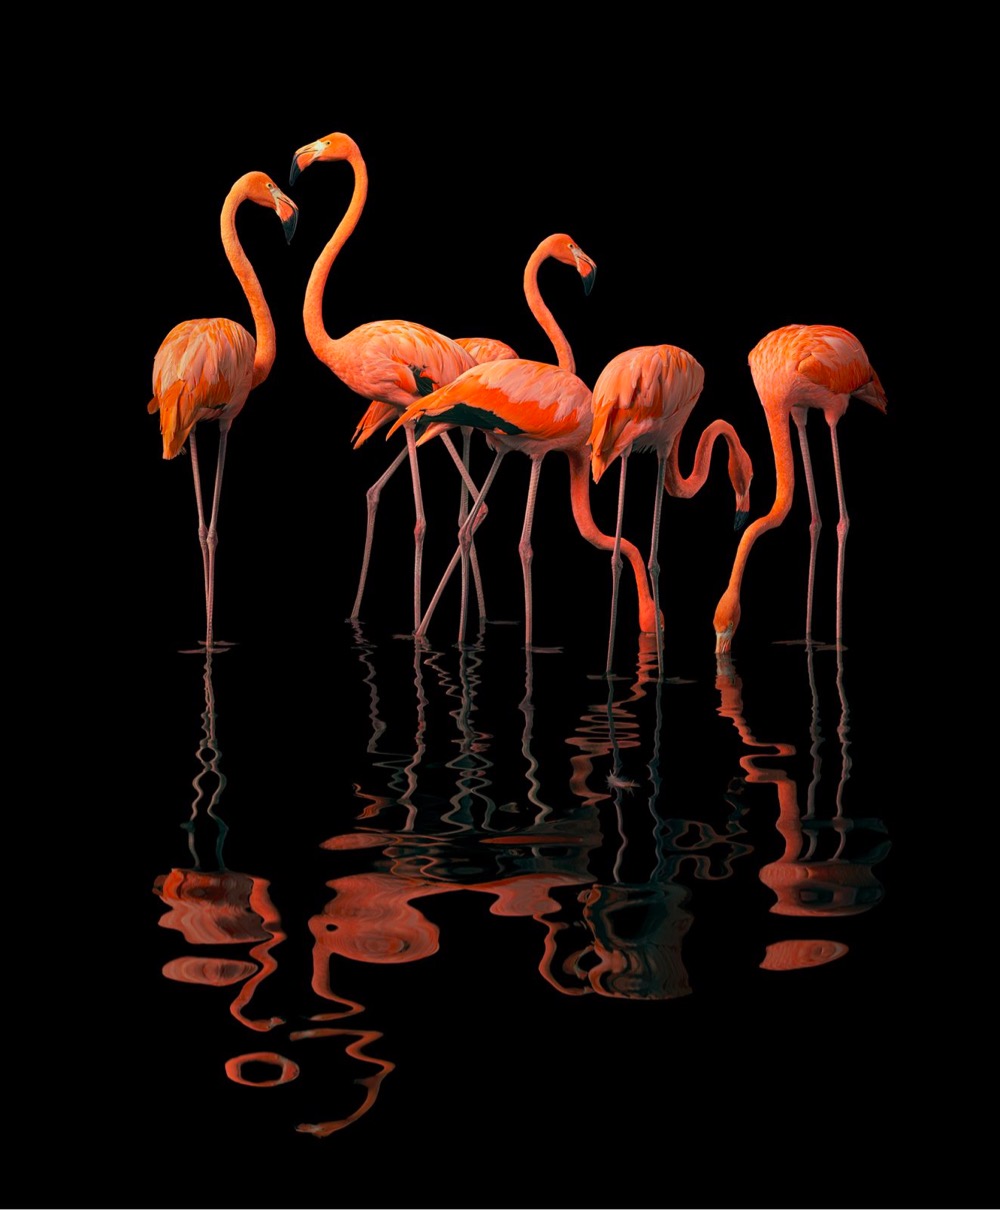 group of flamingos on a black background